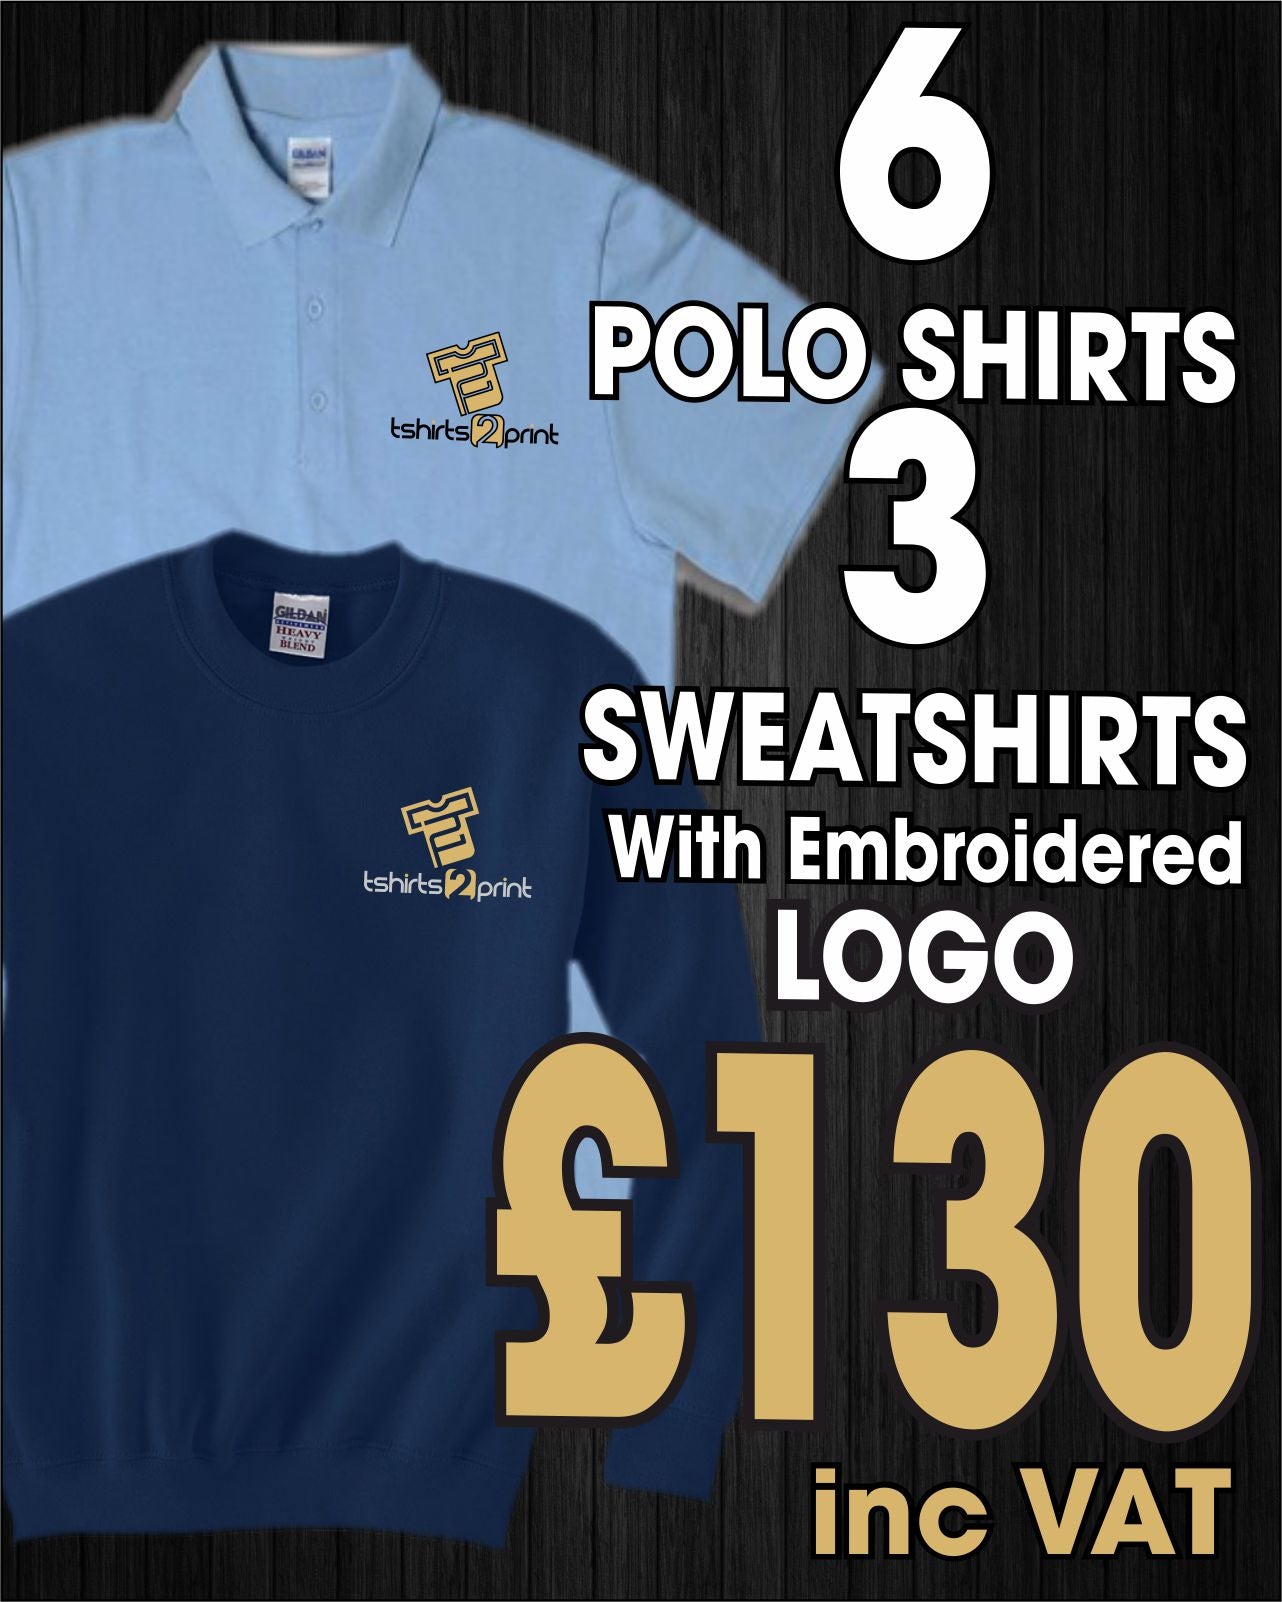 6 x Polo Tops, 3 X Sweatshirts with Embroidered LOGO